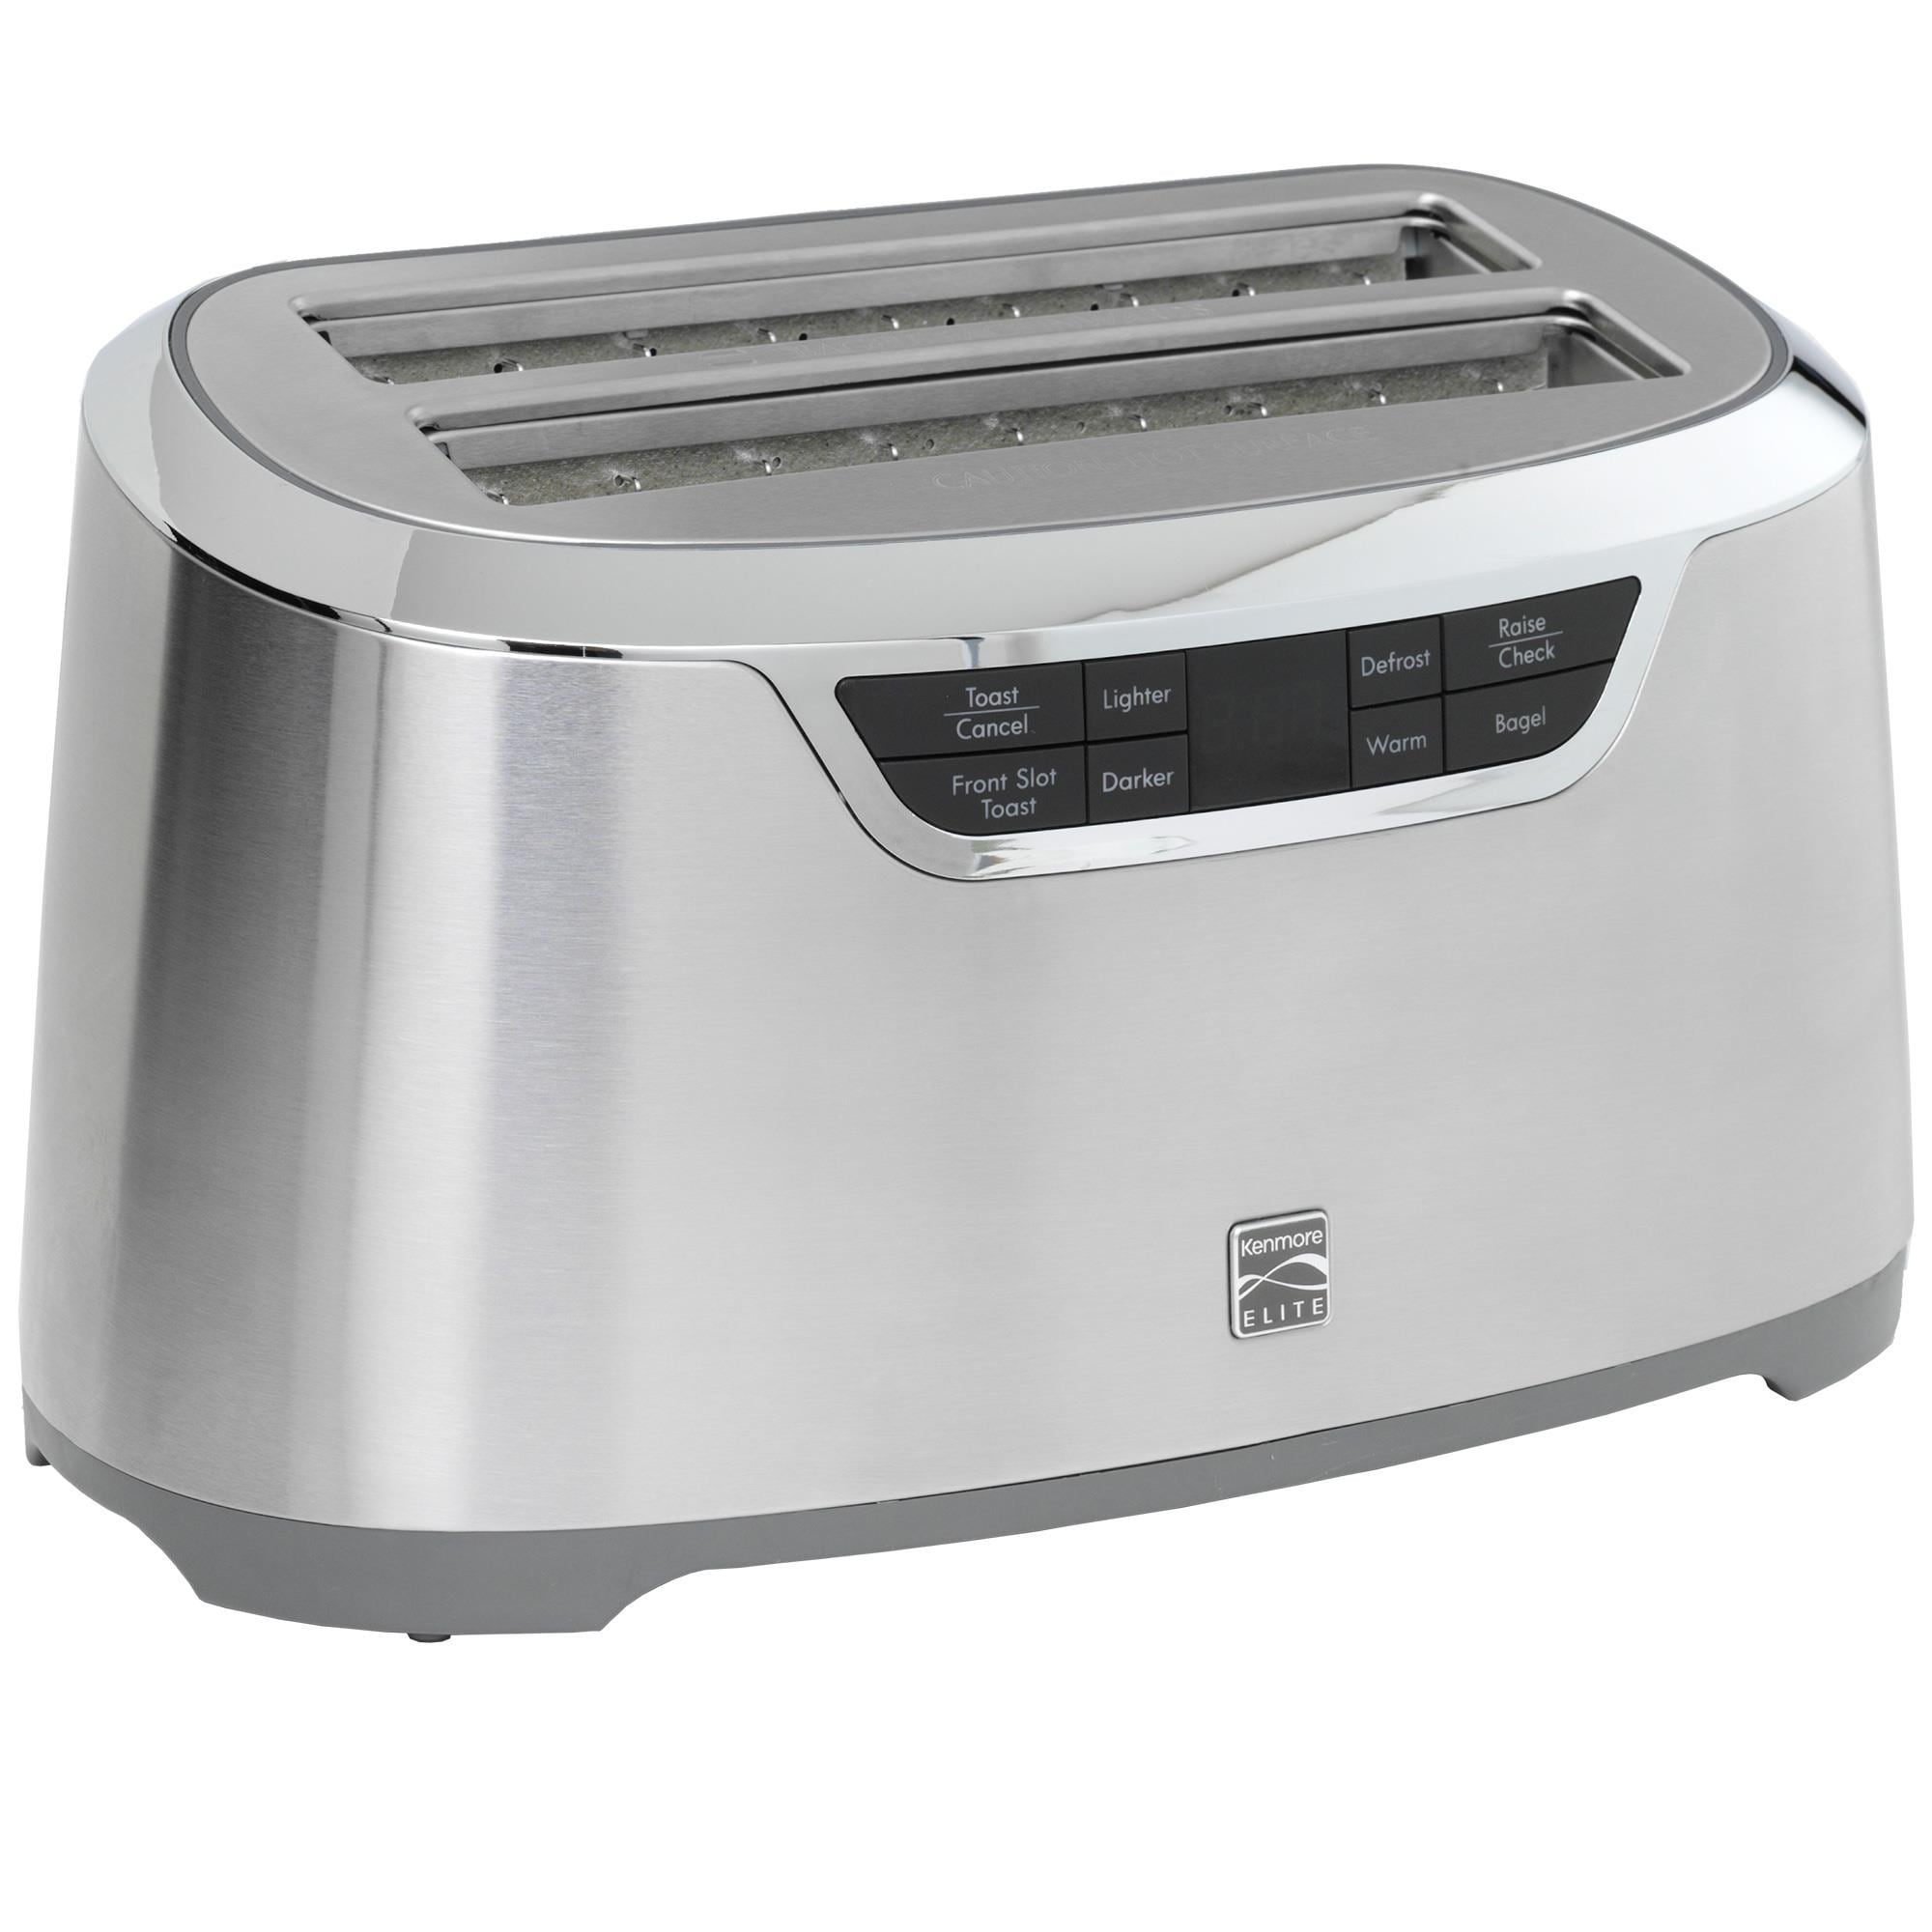 Oster 4-Slice Extra-Long-Slot Toaster Stainless Steel  - Best Buy